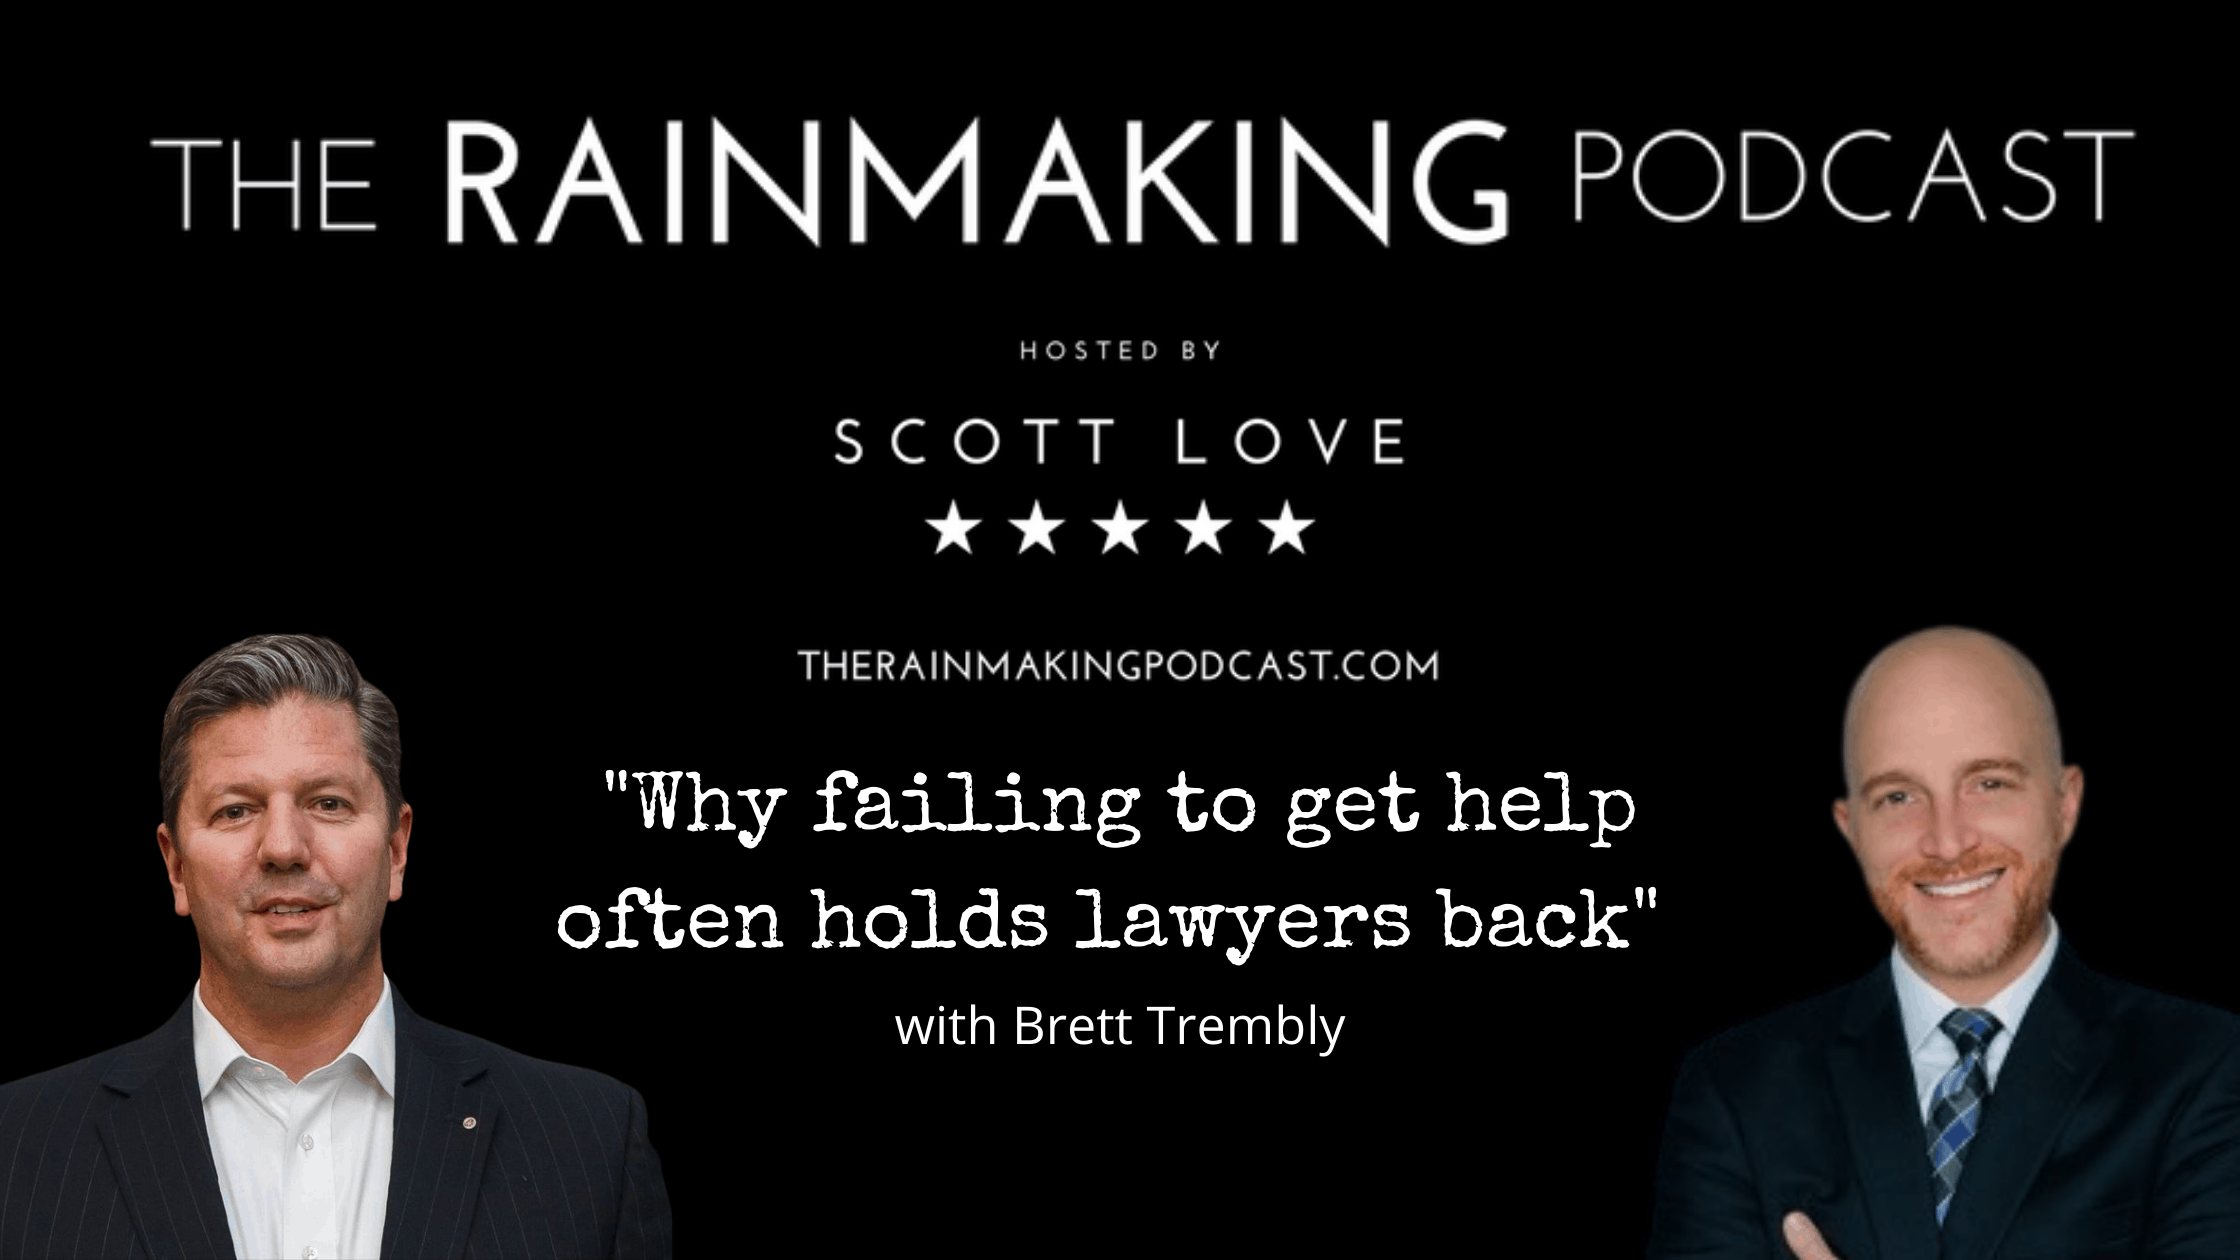 The Rainmaking Podcast